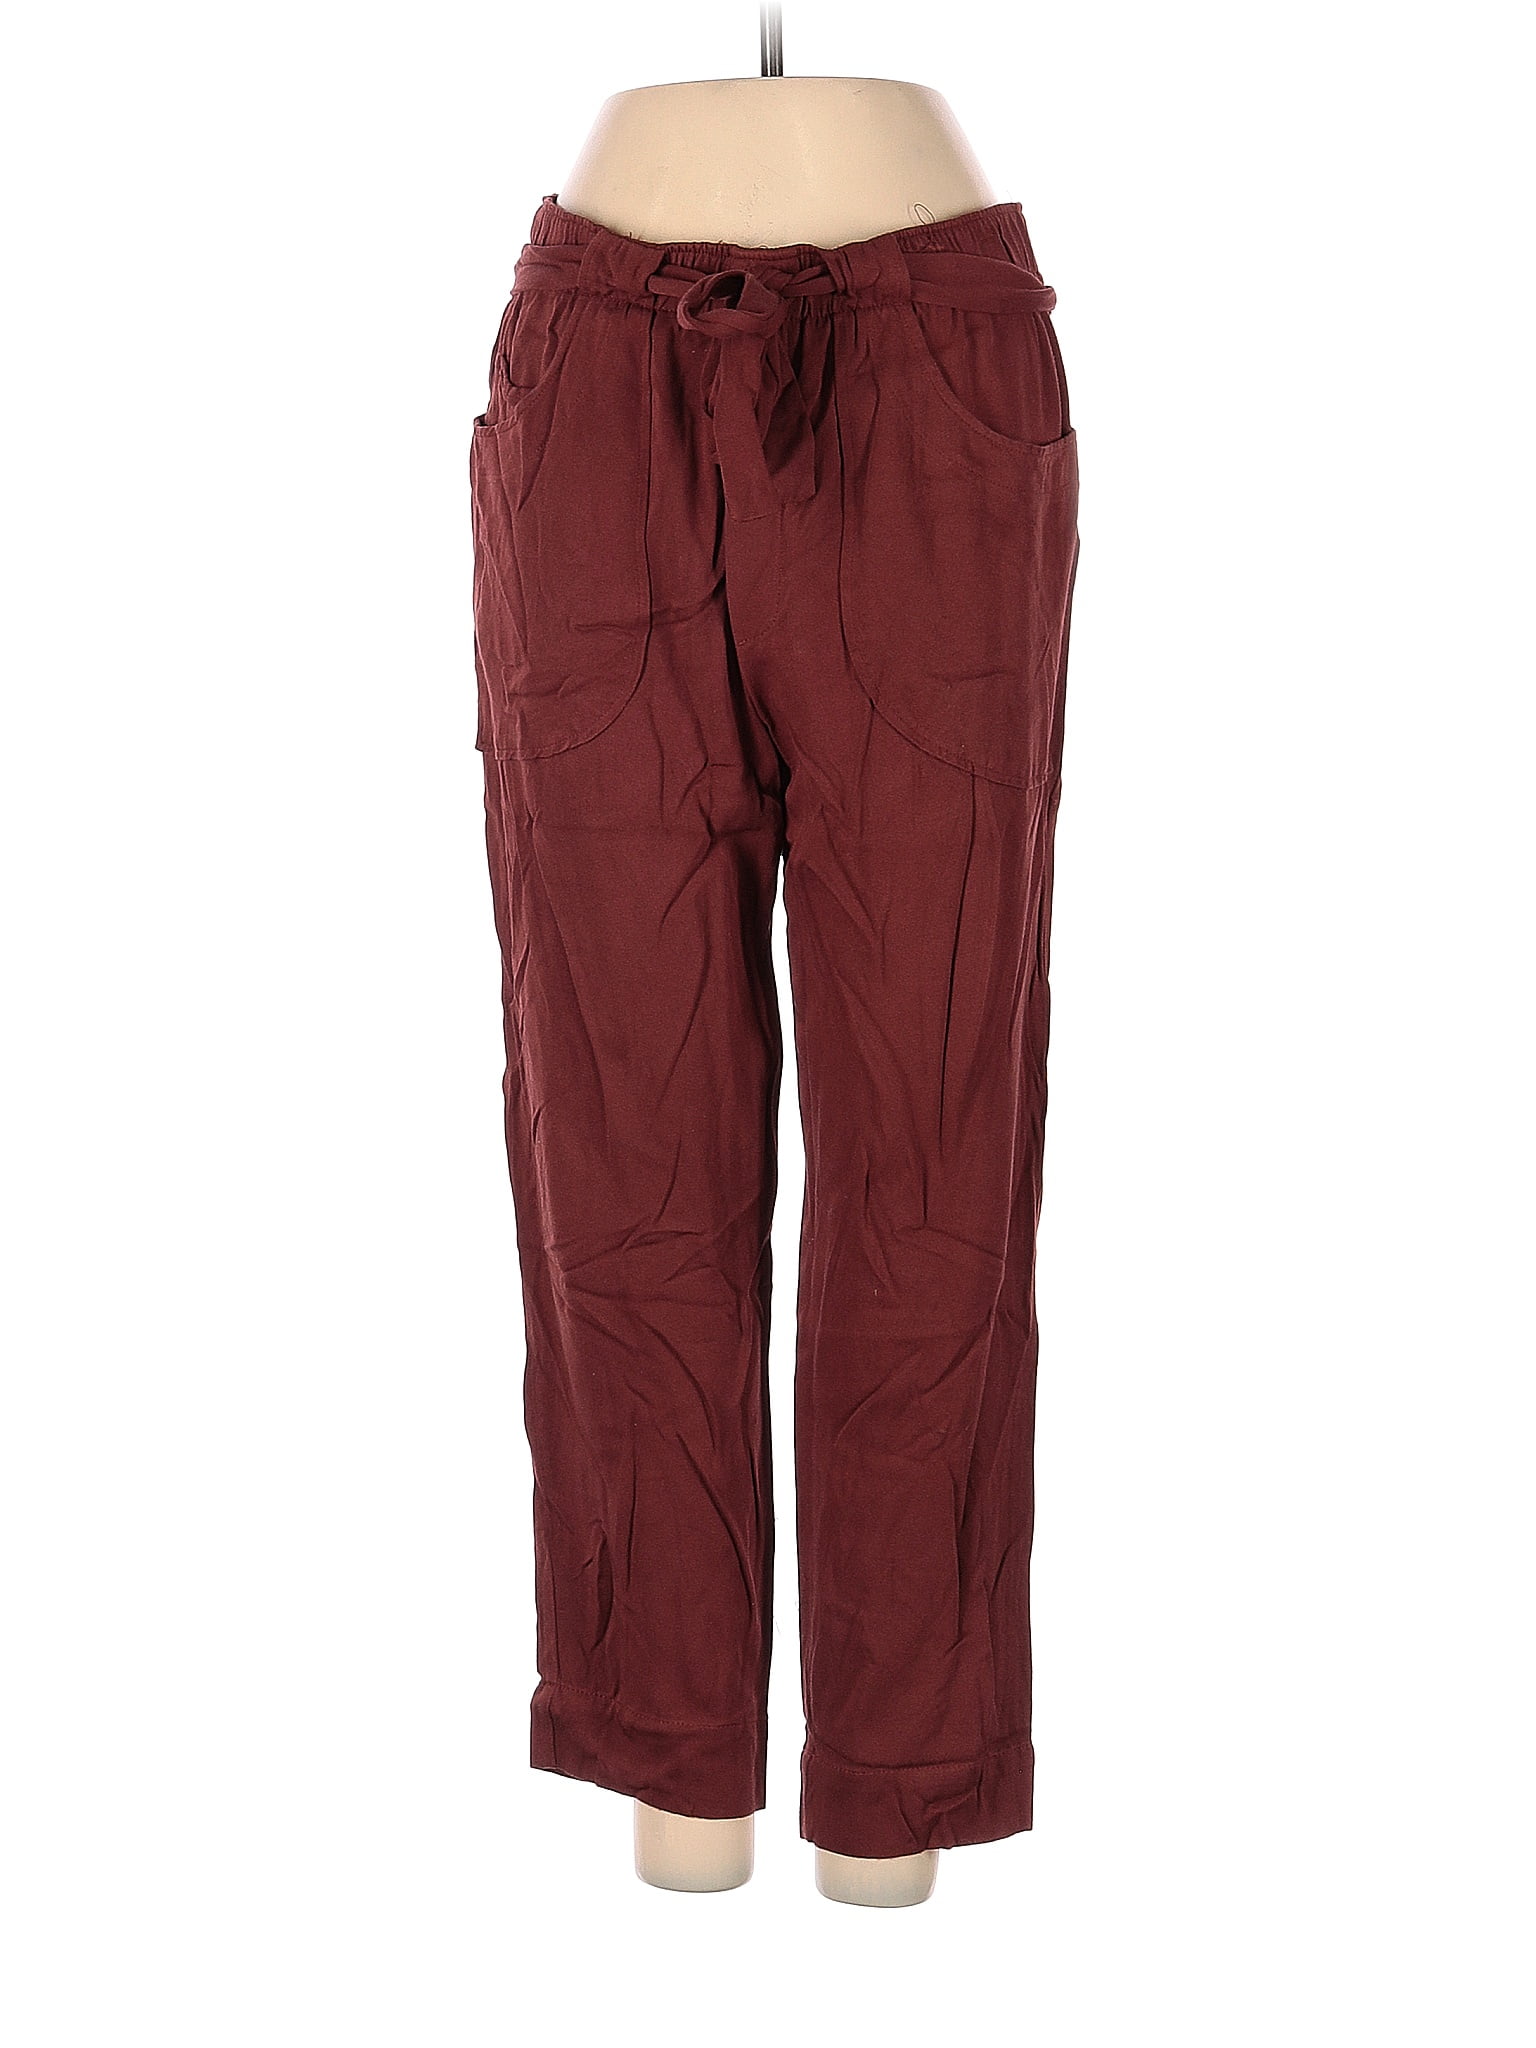 Dolan Women Red Casual Pants S